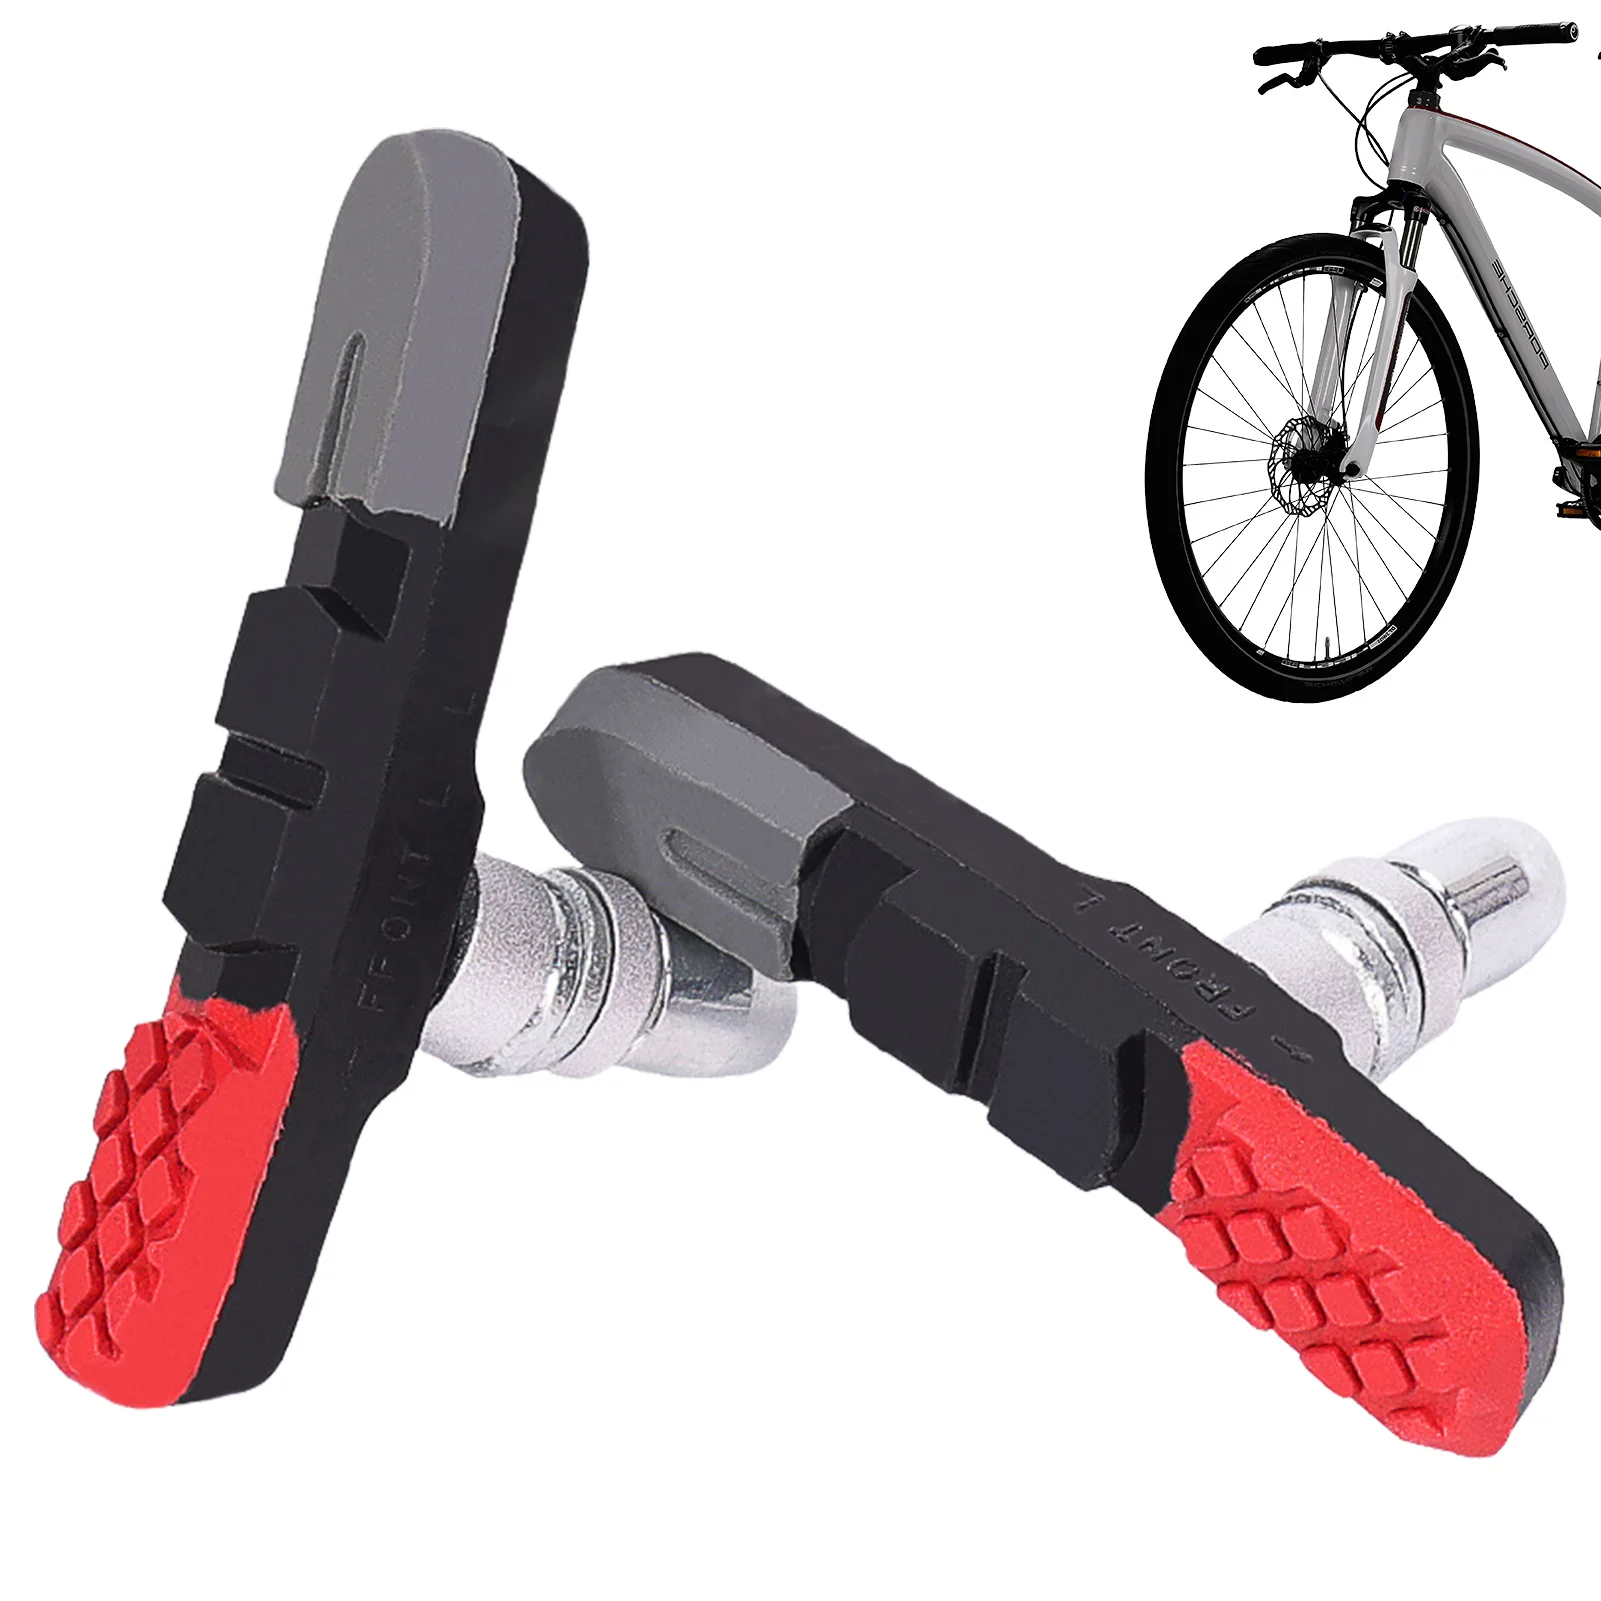 

Bike Brake Pads Rubber Mountain And Road Bicycle V Brake Pads Bike Cycle Brake Pads Block Drainage Pattern Design 73mm/3.14